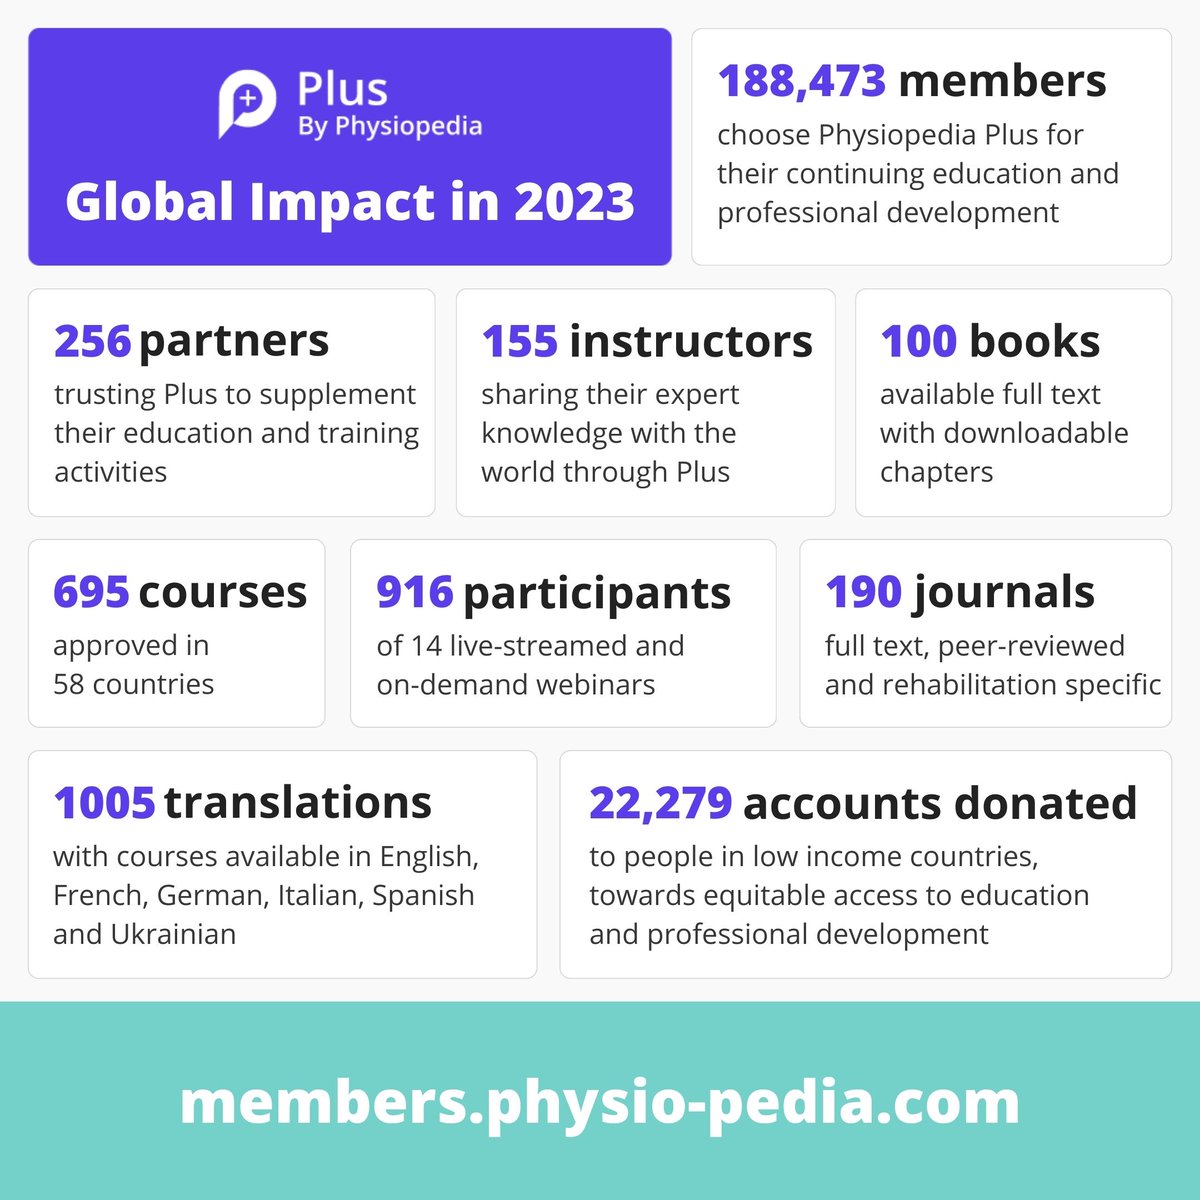 The global impact of Physiopedia Plus has grown beyond expectation in 2023 💜 Thank you for being an integral part of our thriving community 💜 Subscribe to learn, connect and reach your career goals with online courses, resources and live webinars ➡️ bit.ly/3RJinJm